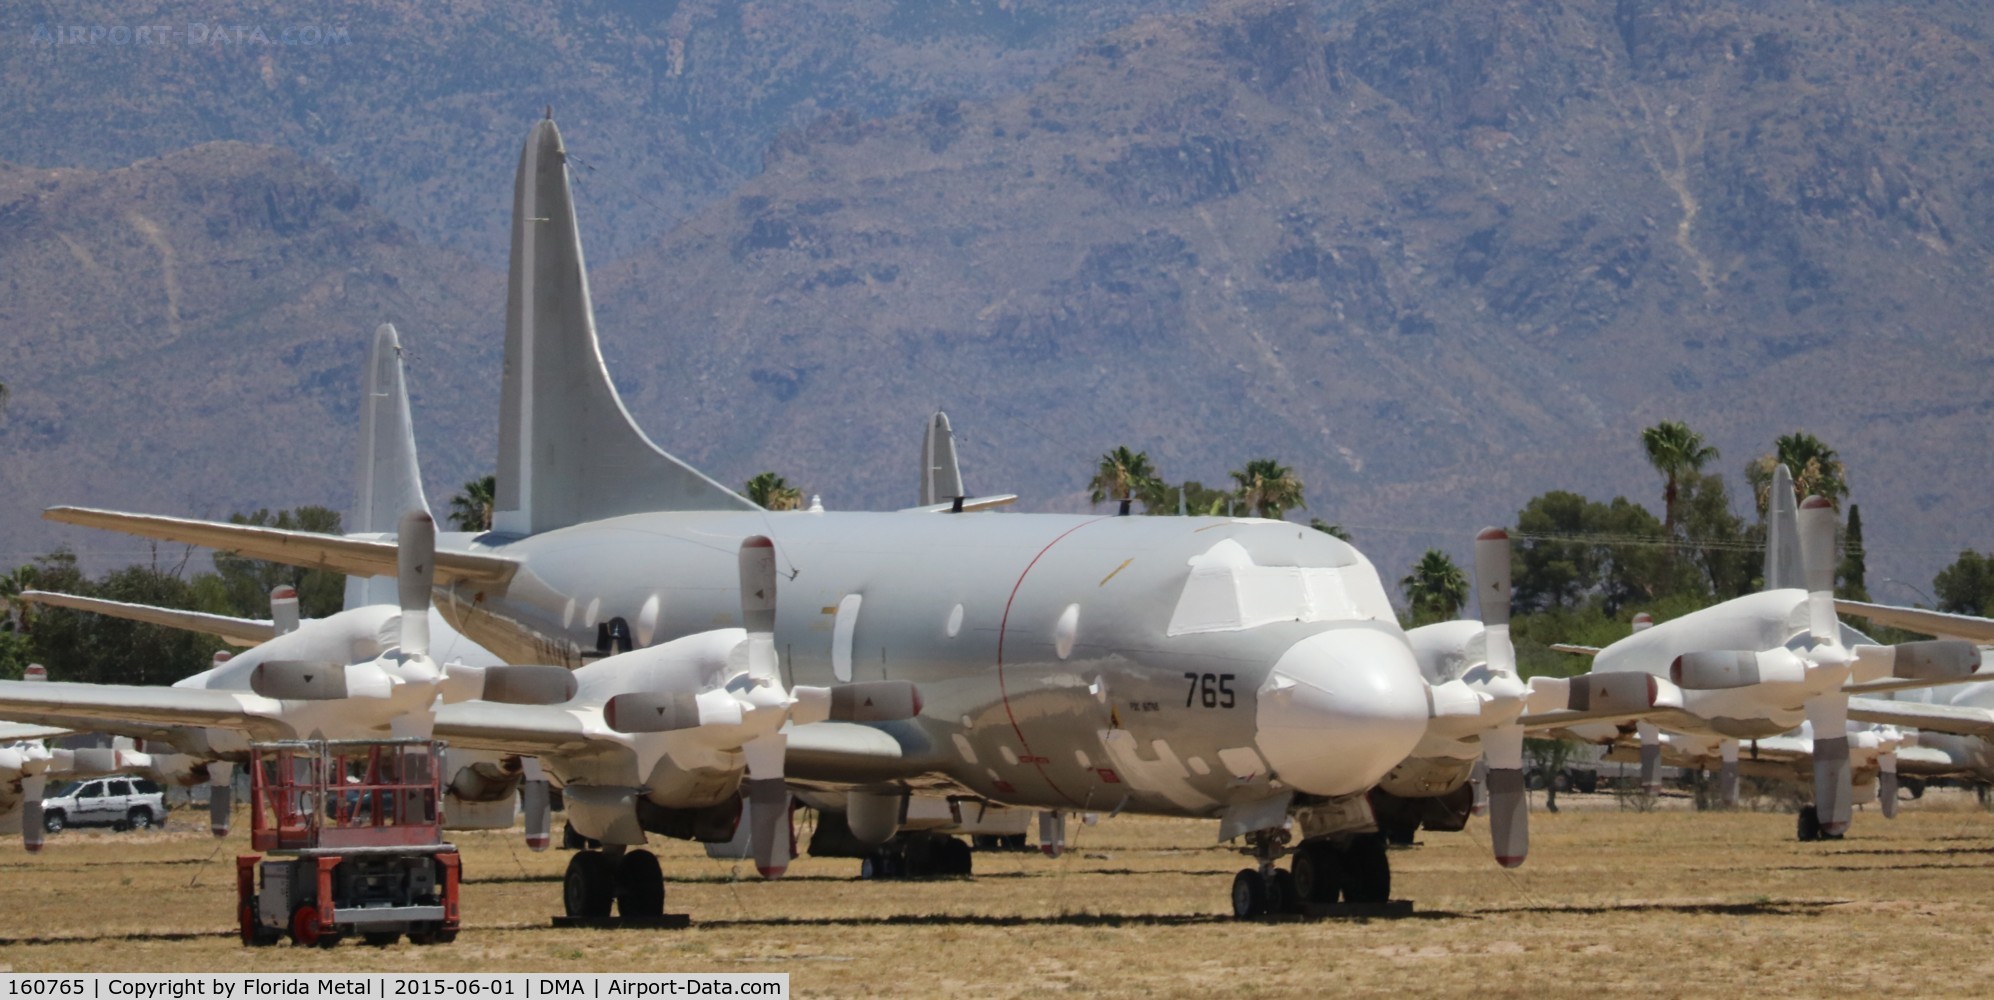 160765, Lockheed P-3C Orion C/N 285A-5674, P-3C Orion